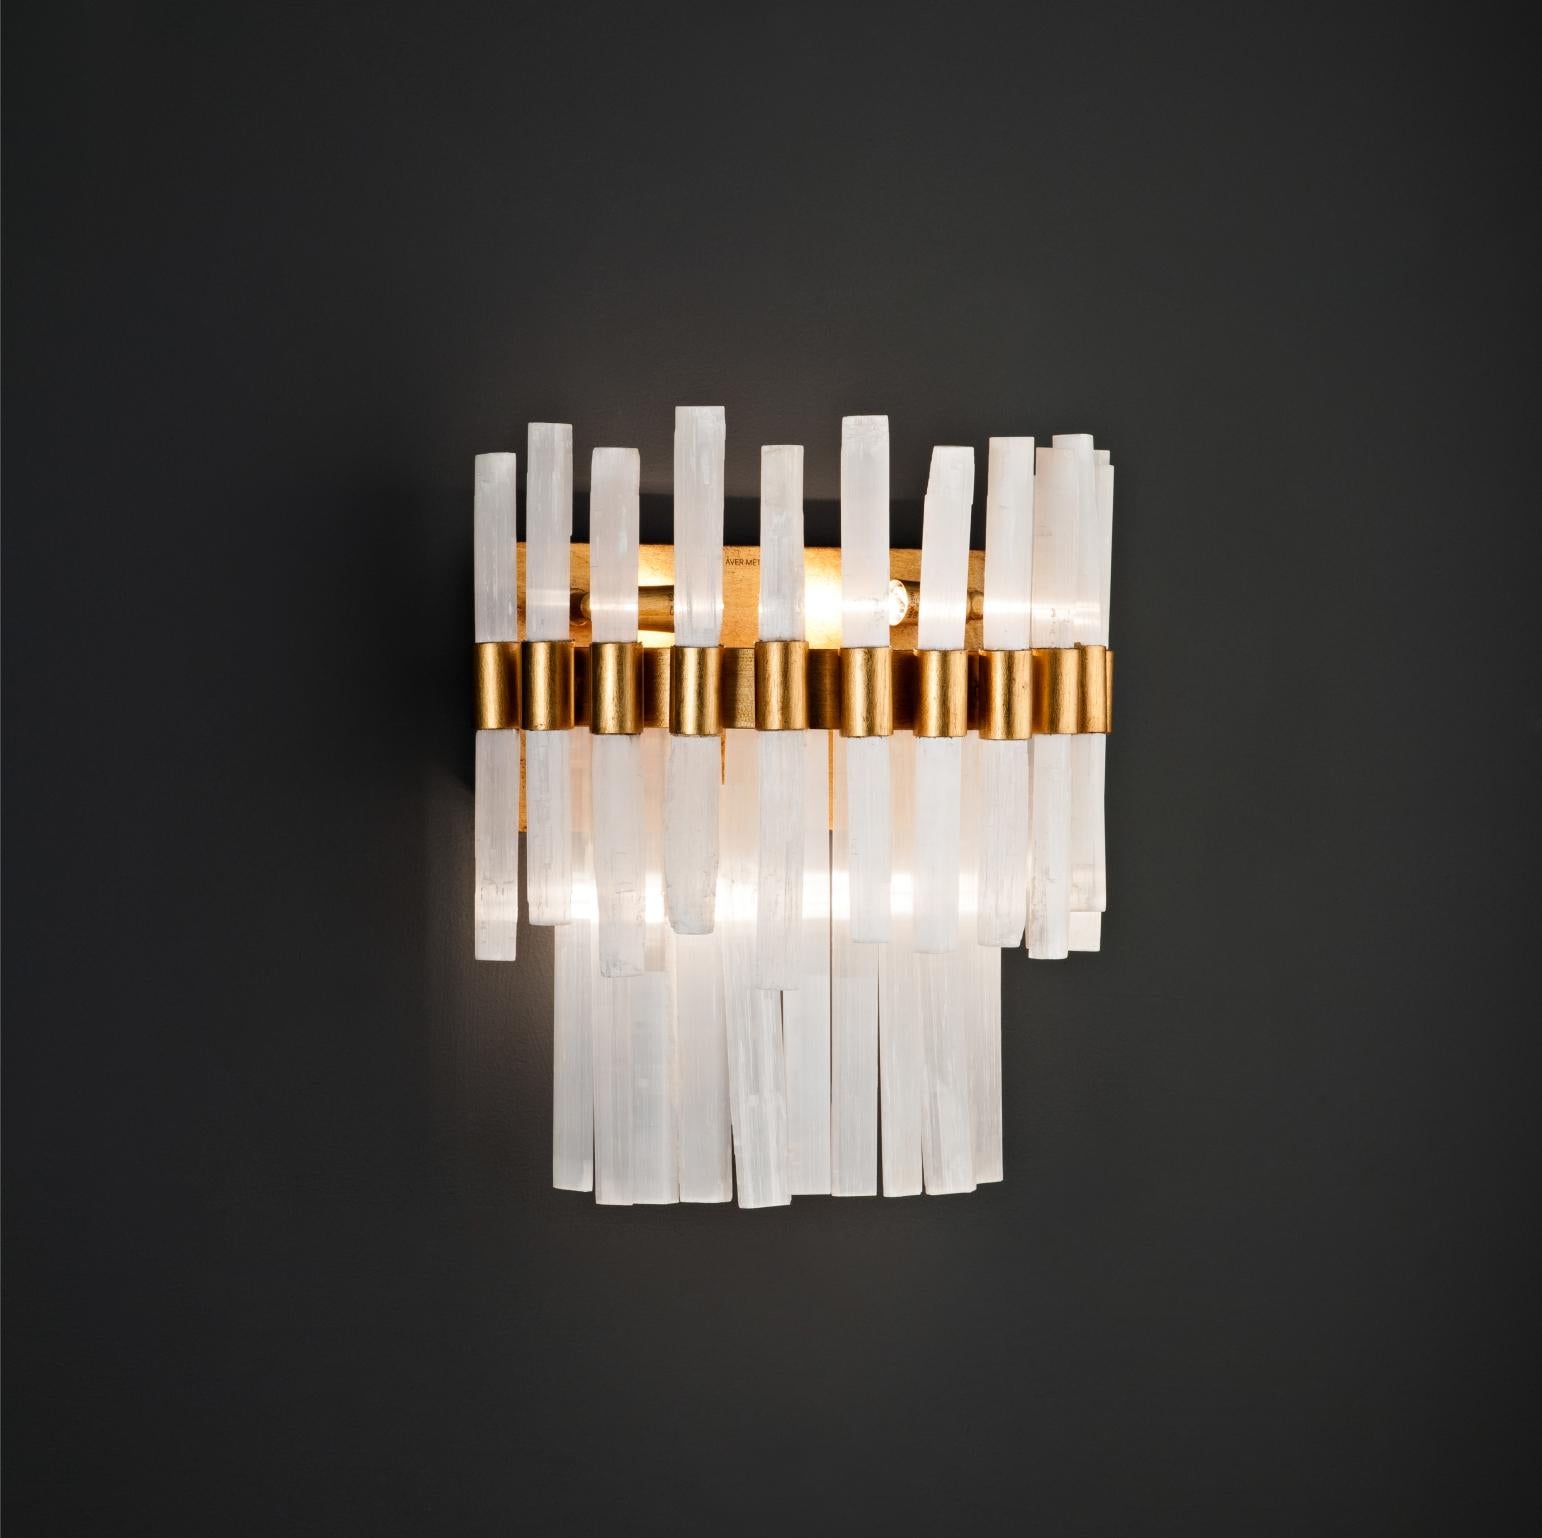 Selenite wall sconce by Aver
Dimensions: D 19 x W 28 x H 35 cm.
Materials: Moroccan natural selenite rock, metal.
Lighting: 4 x G9
Finishes: Gold Leaf, Silver Leaf, Warm Gold Leaf, Warm Silver Leaf, Warm Copper Leaf, Dark Gold Leaf, Dark Silver